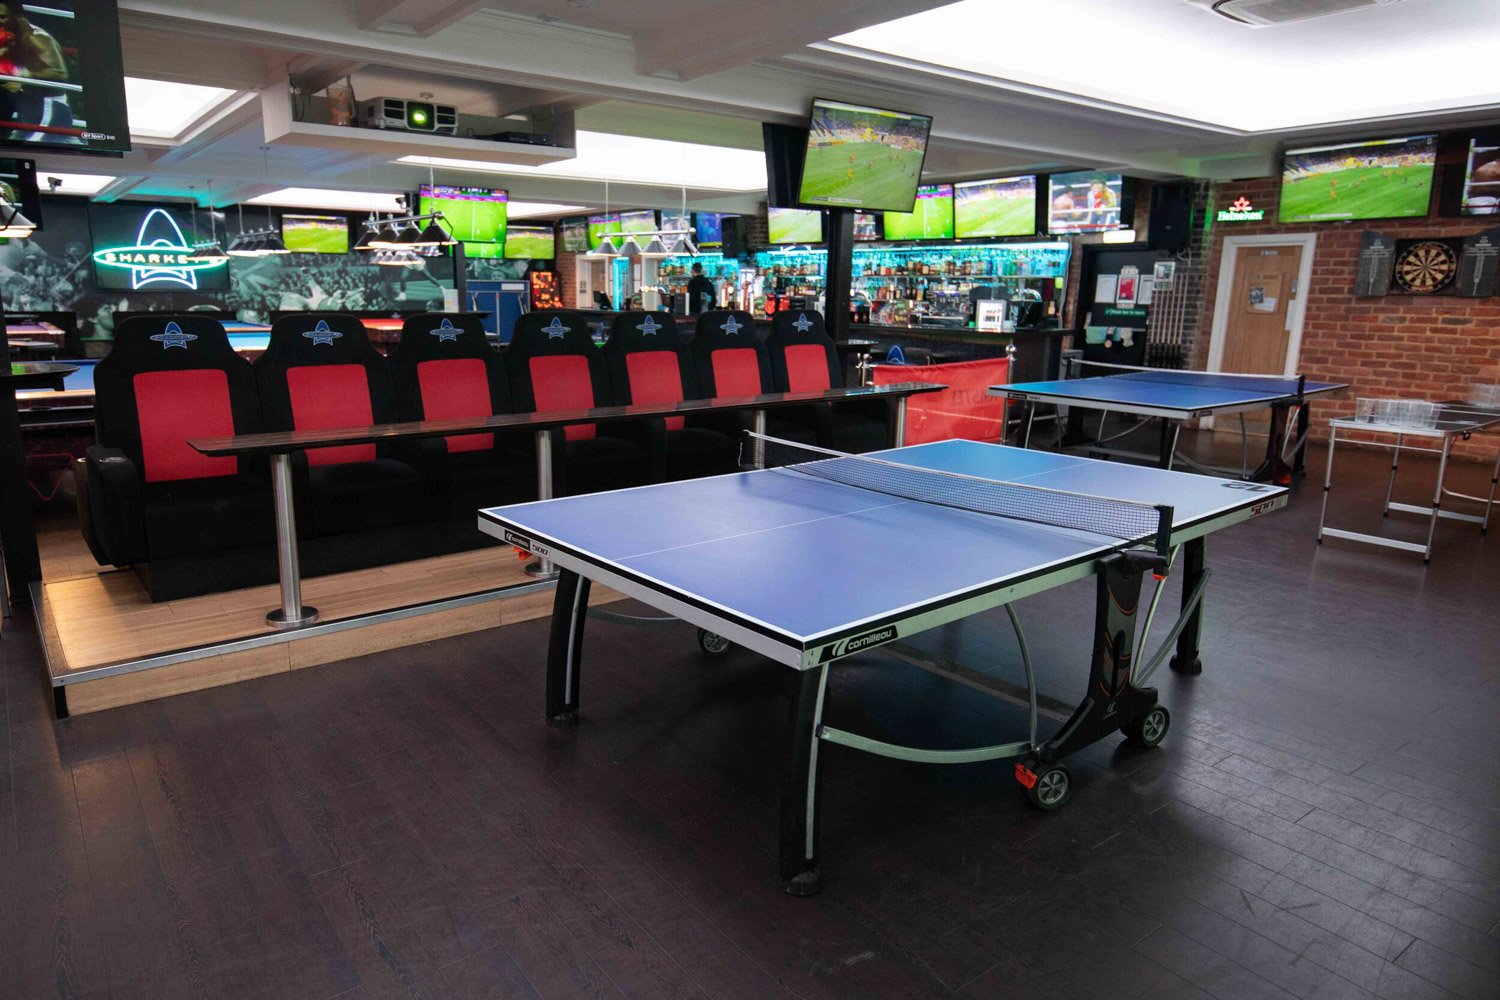 Sharkeys_Sports_Bar_Bournemouth_Live_Sports_Poole_Snooker_Table_Tennis_VIP_Rooms_Consoles-14.jpg